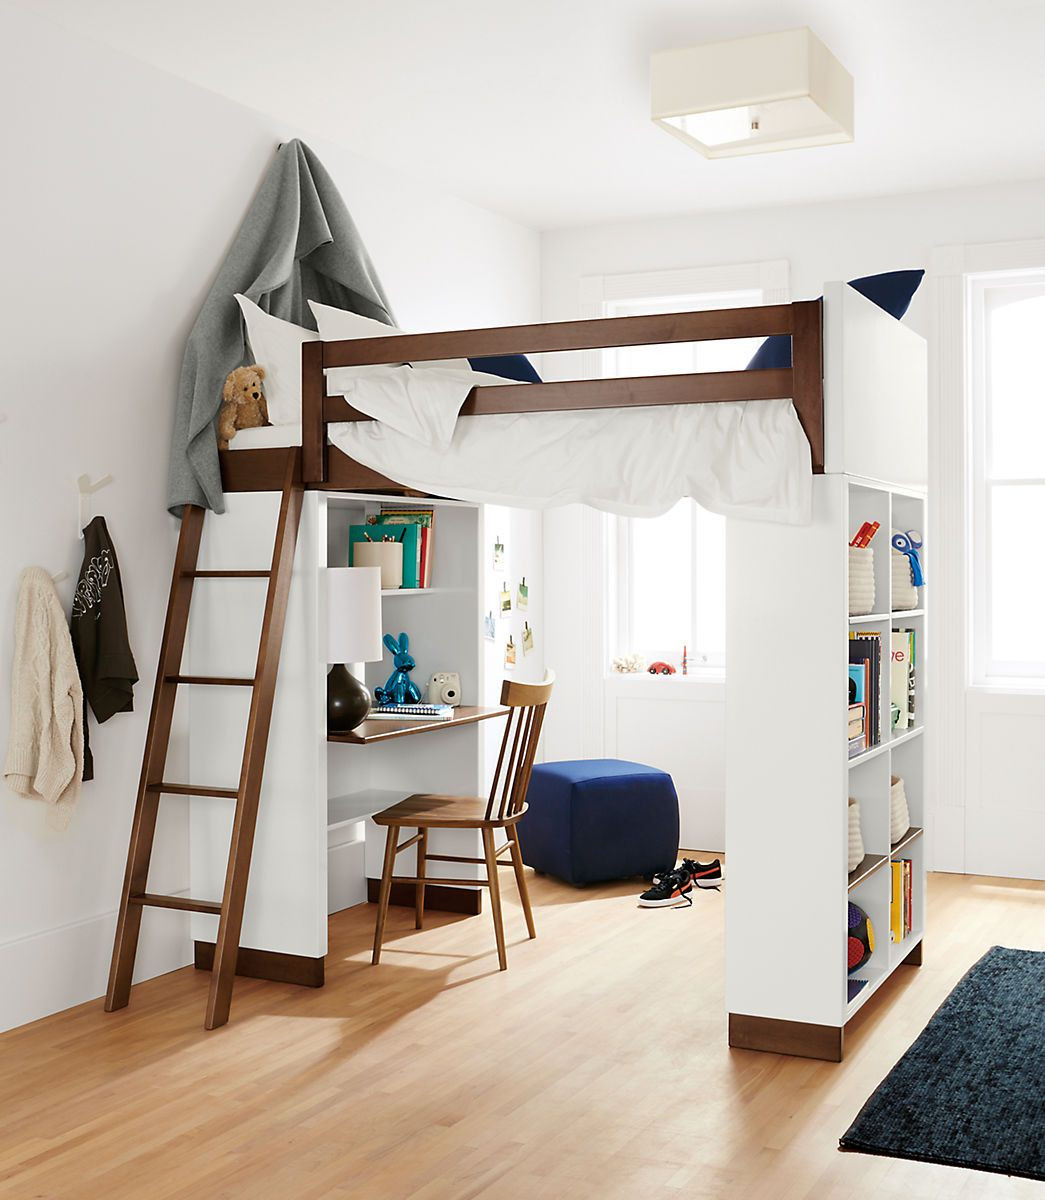 Loft Bedroom Ideas For Kids
 Moda Loft Beds with Desk and Bookcase Options